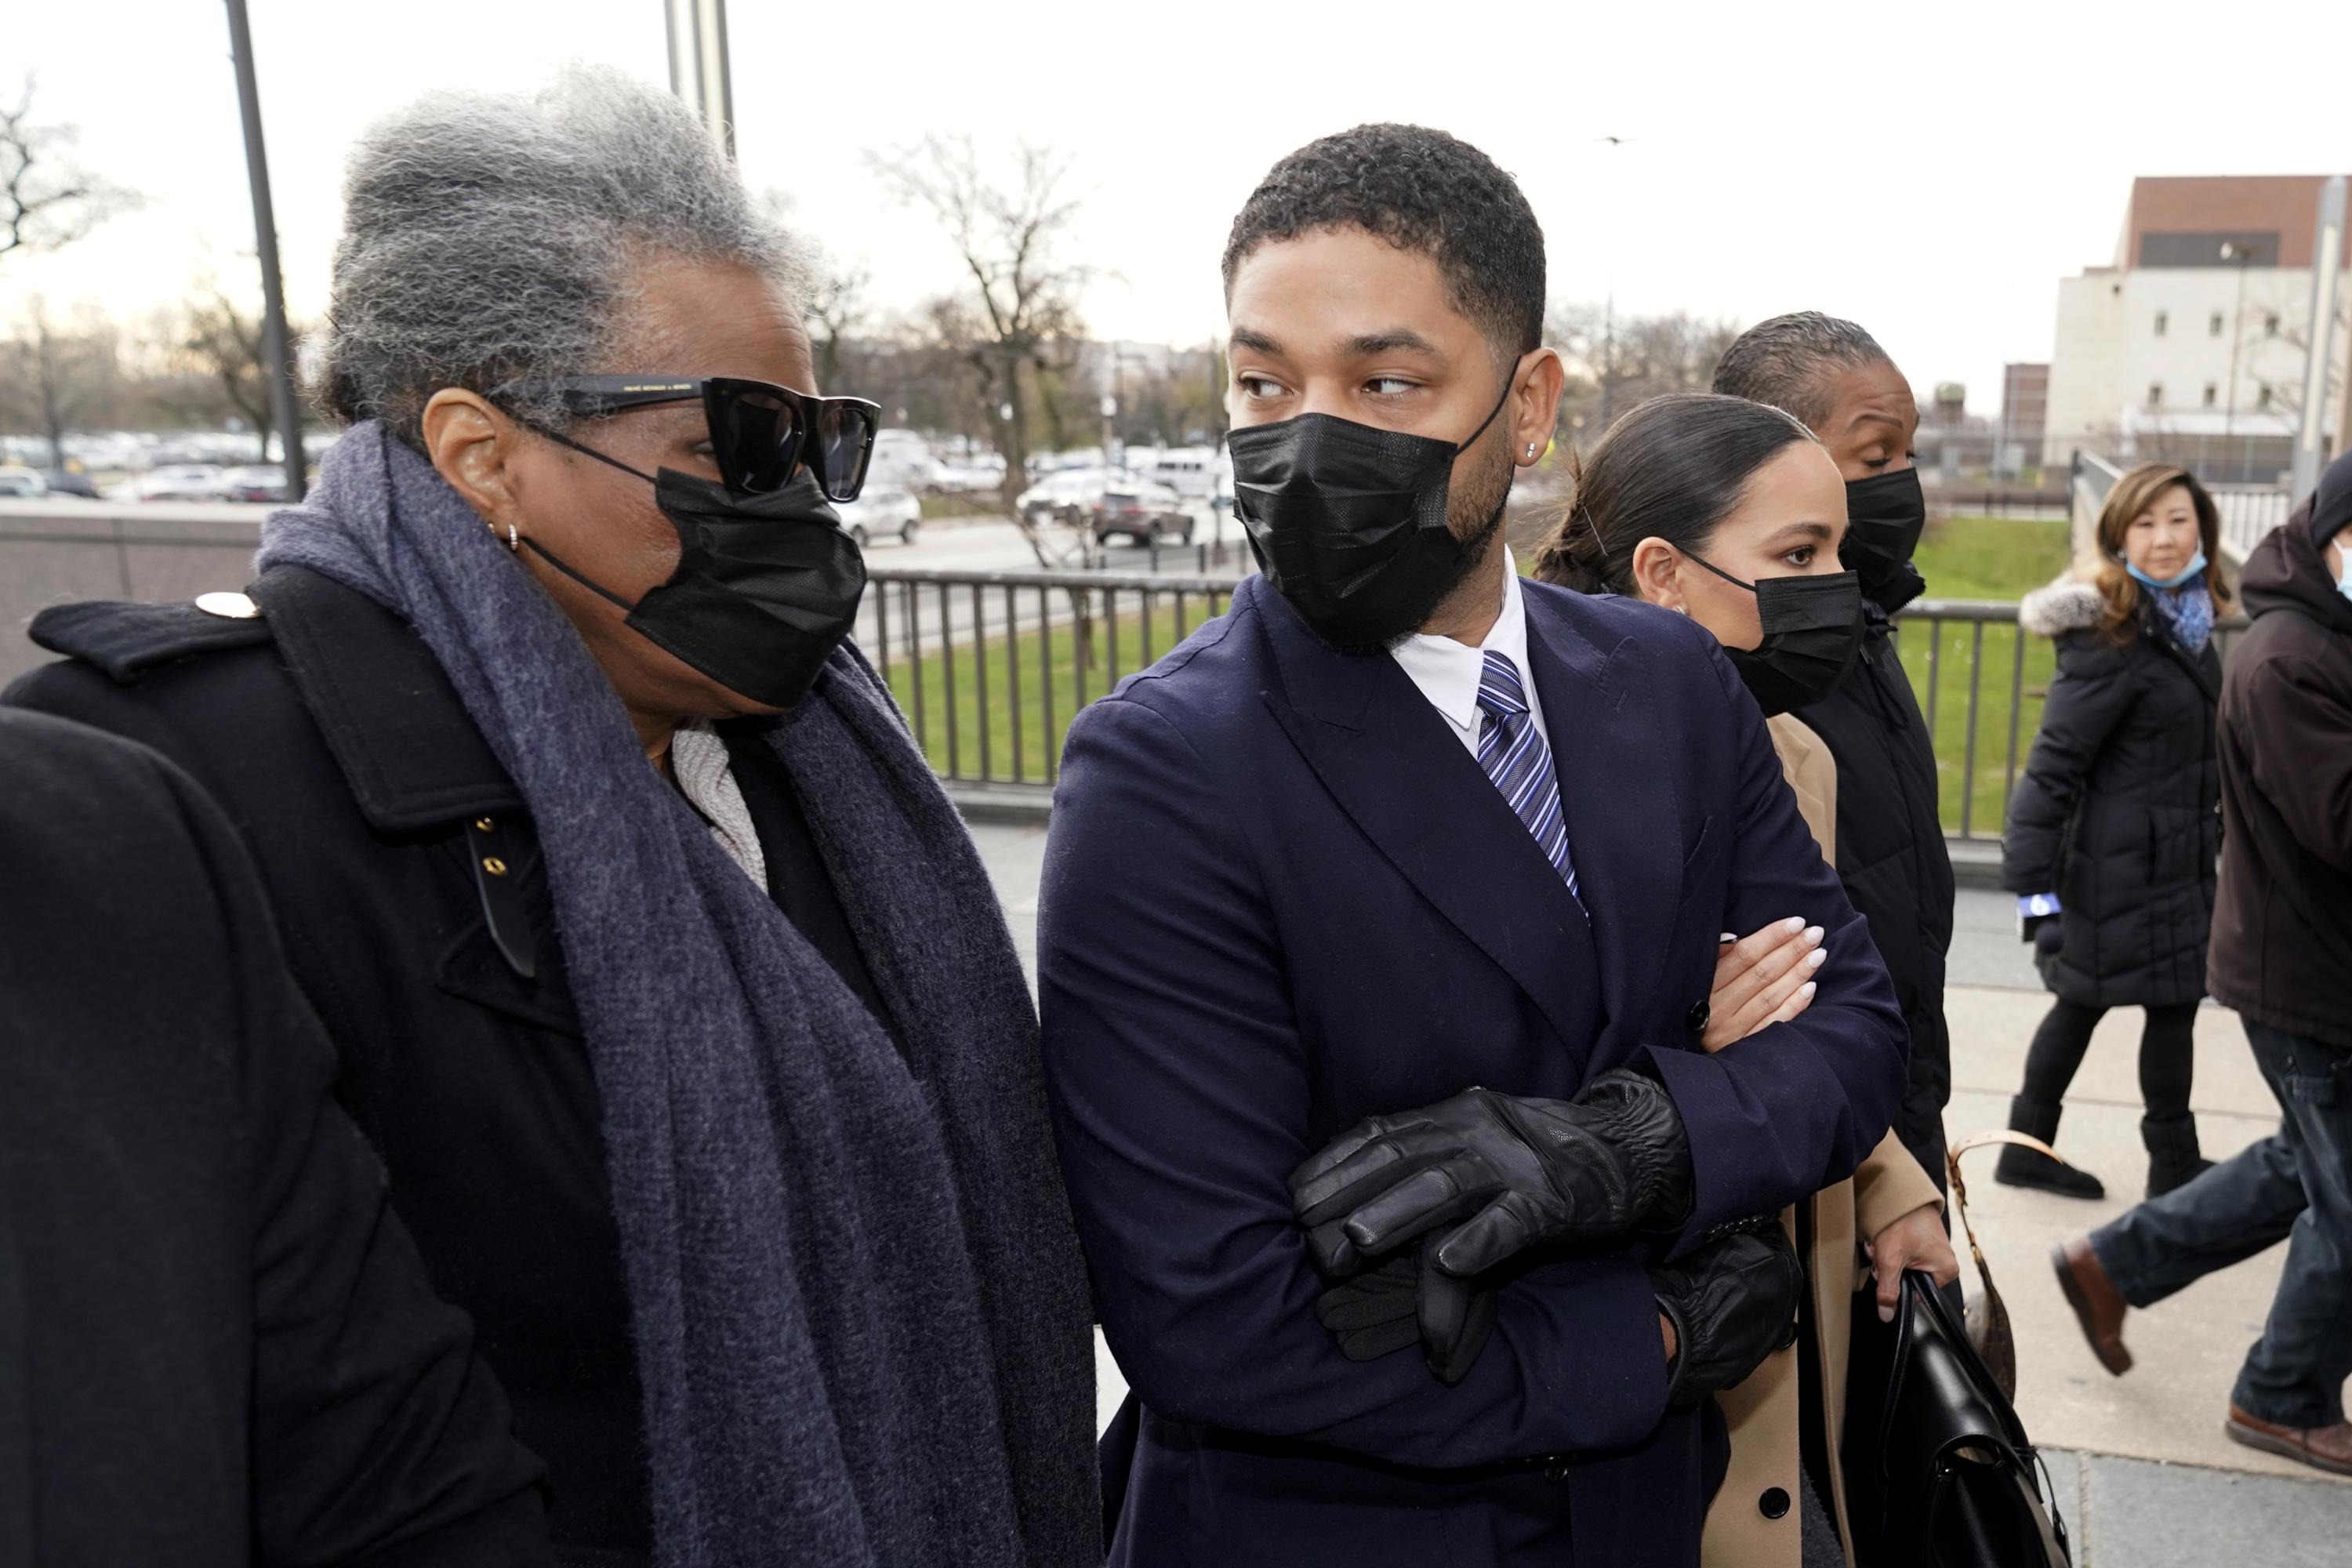 At Jussie Smollett trial, Osundairo brothers at center stage - Associated Press